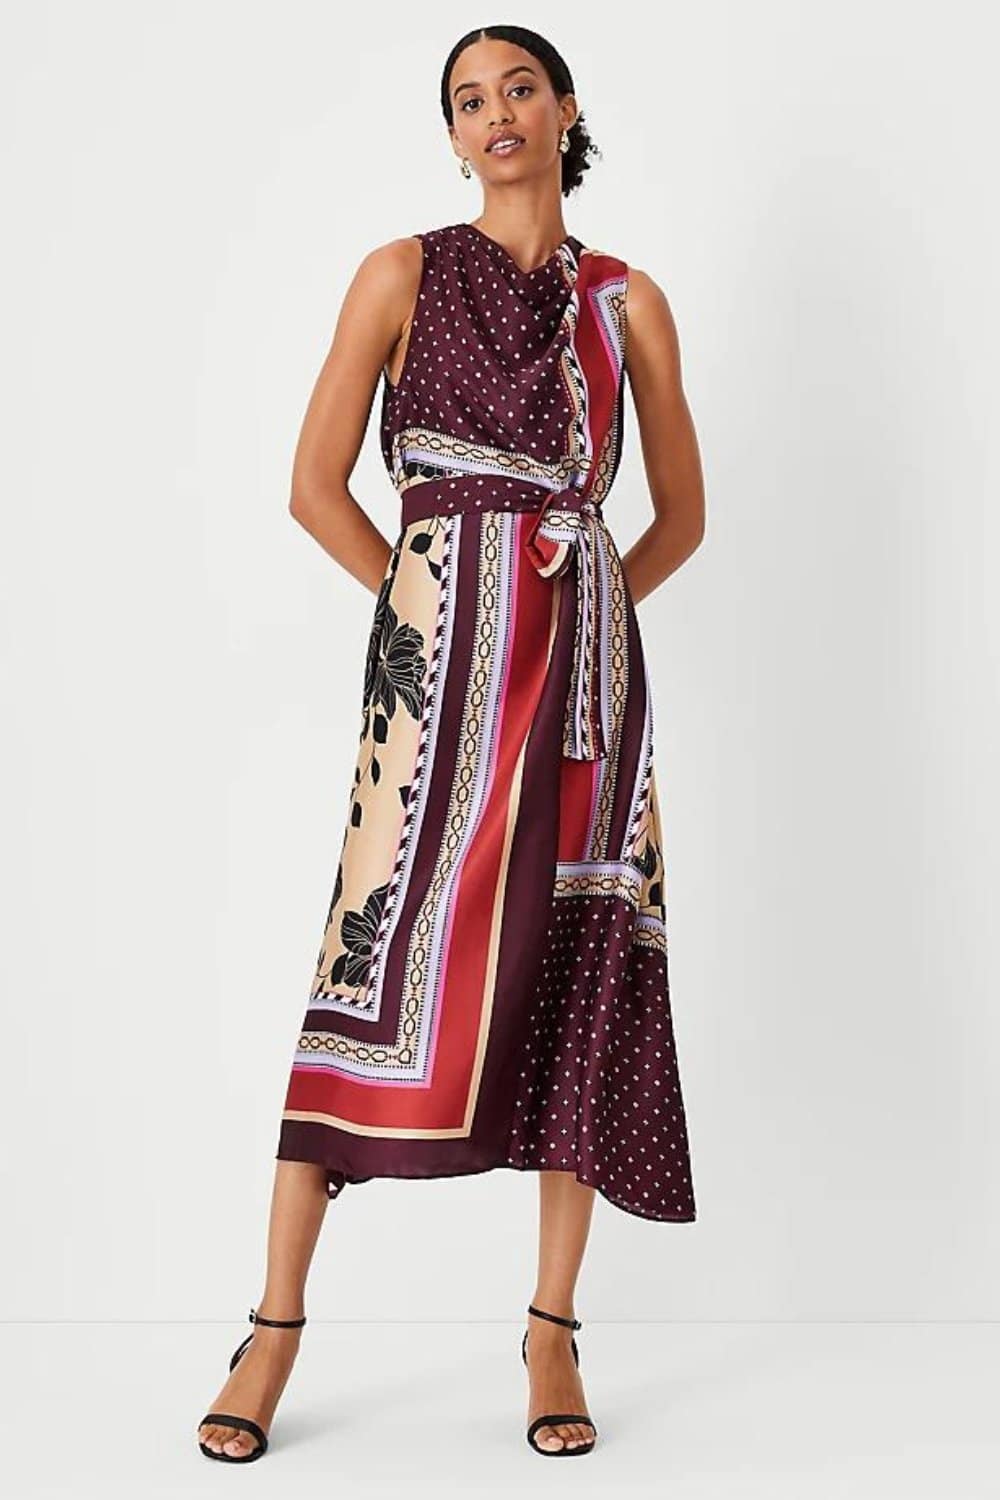 Fall winery outfits with printed dress